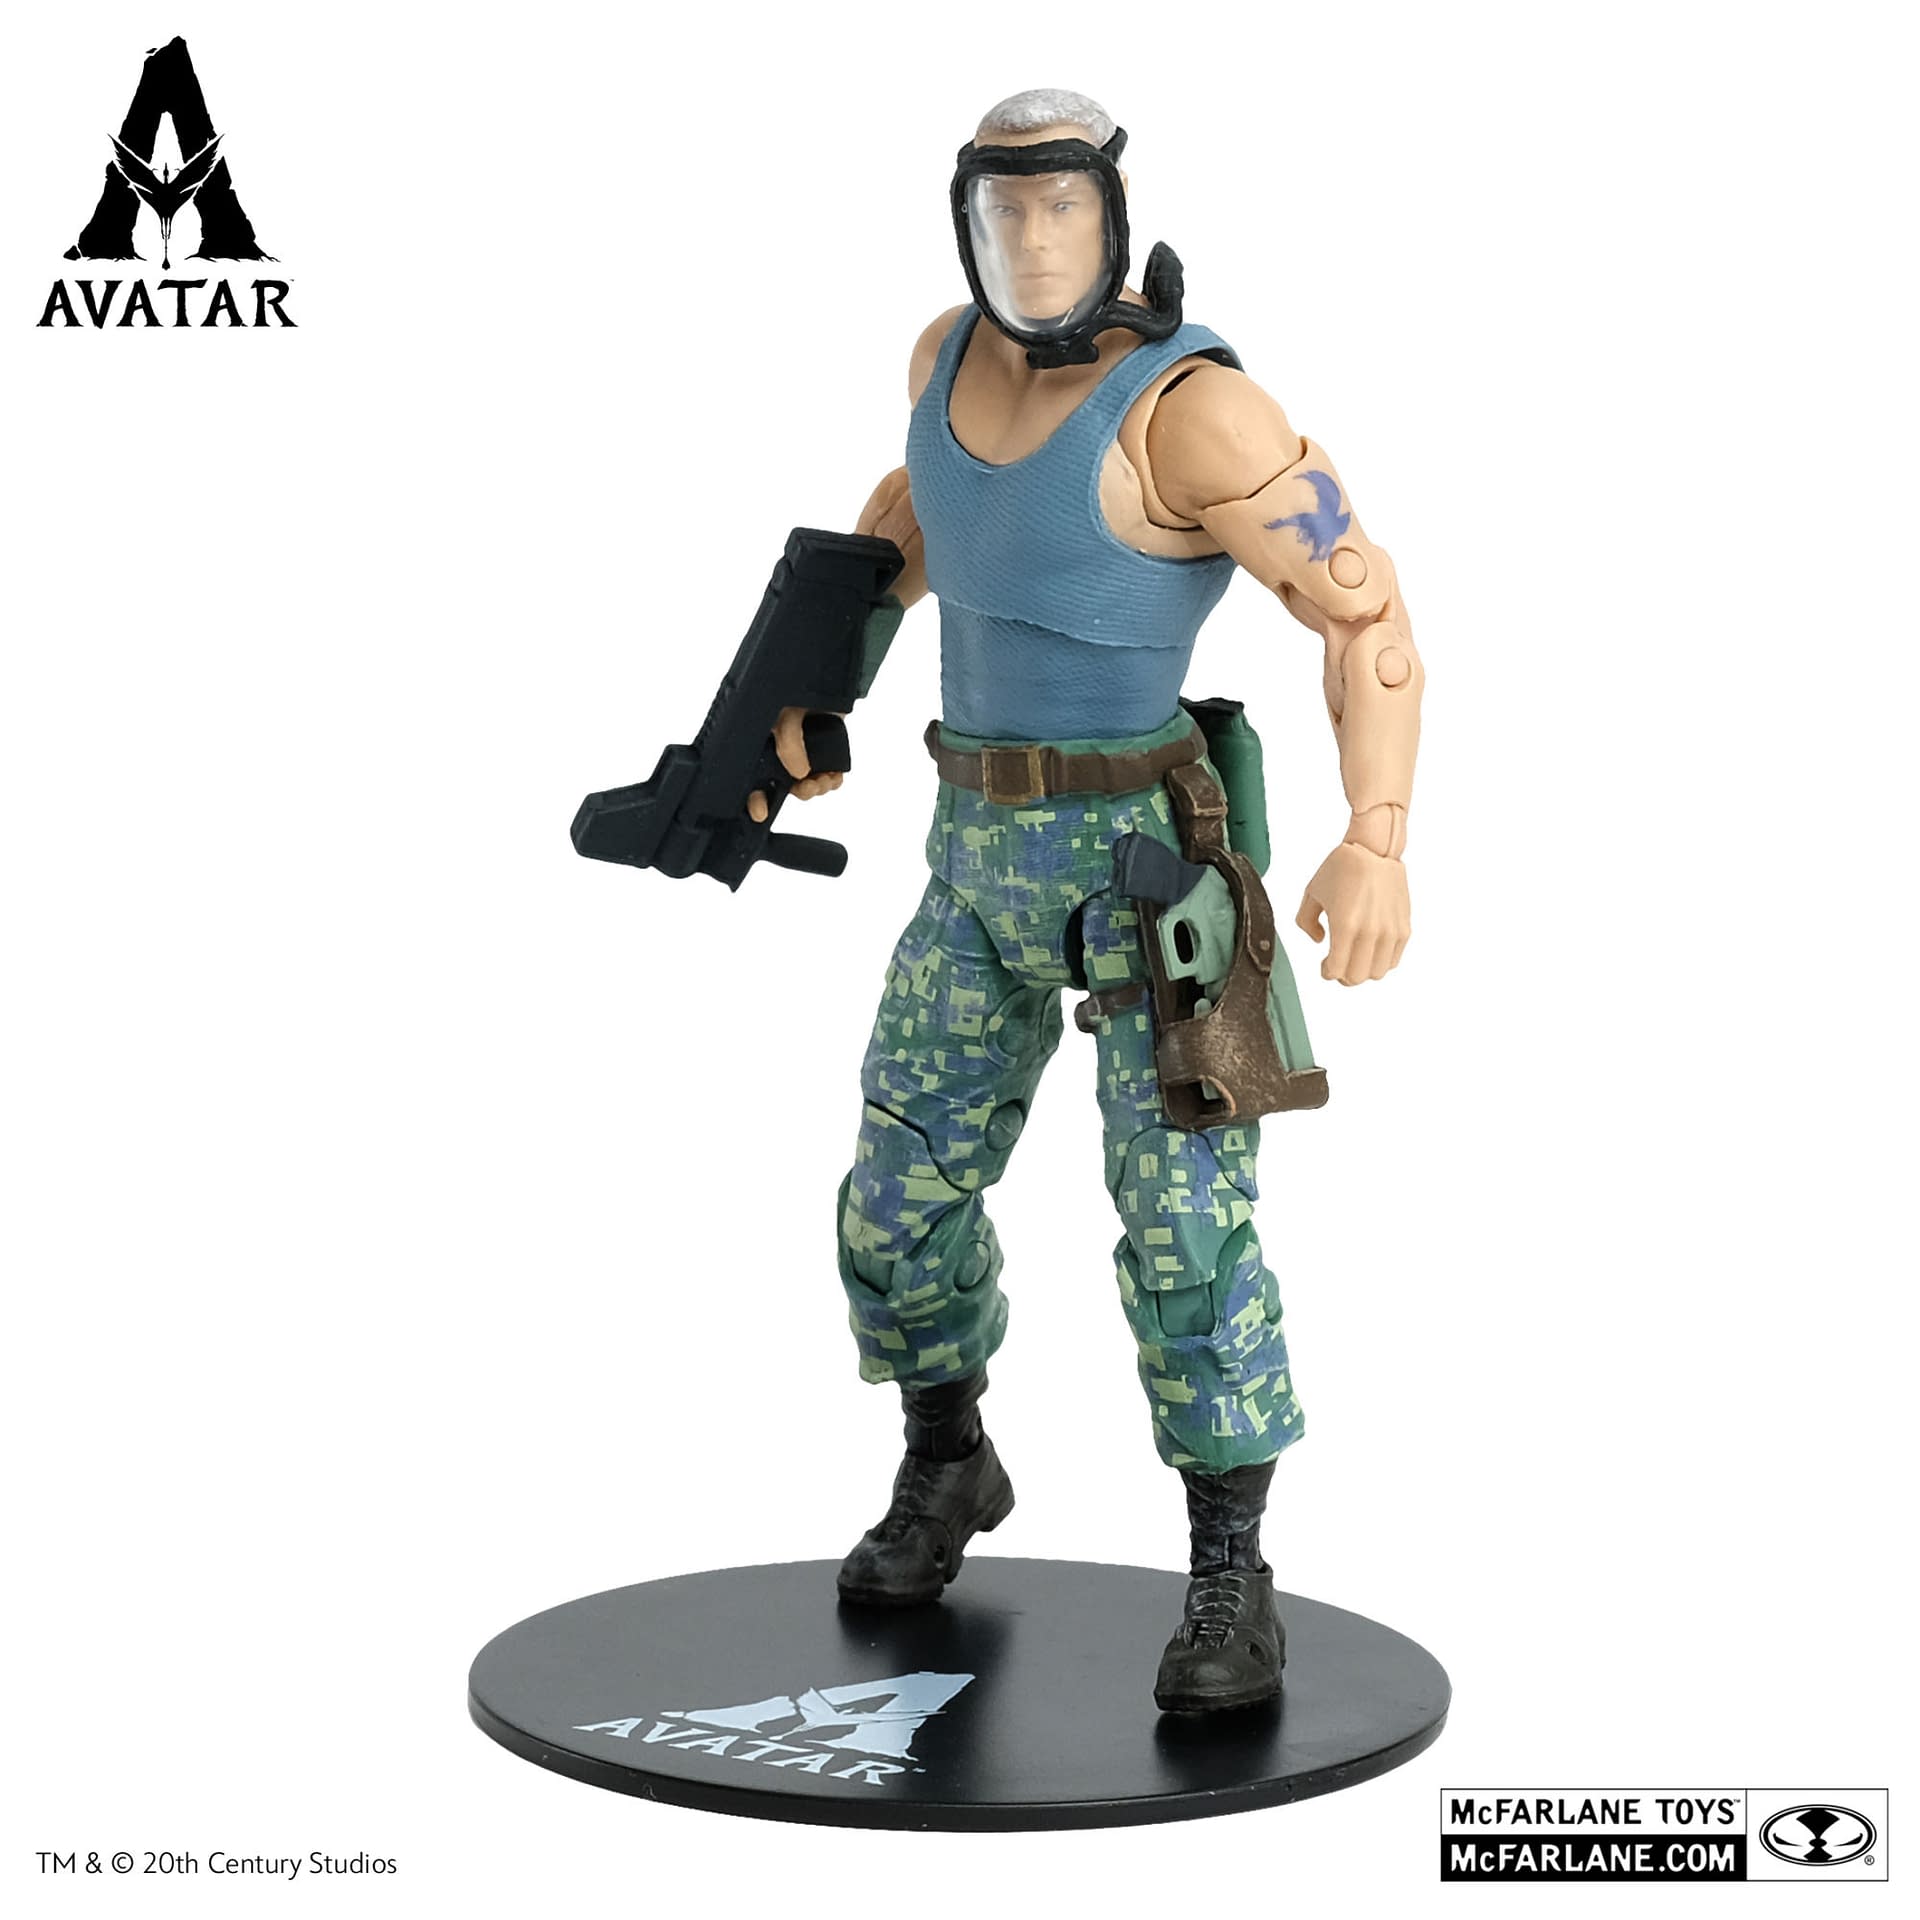 Avatar's Colonel Quaritch and His AMP Suit Arrive at McFarlane Toys